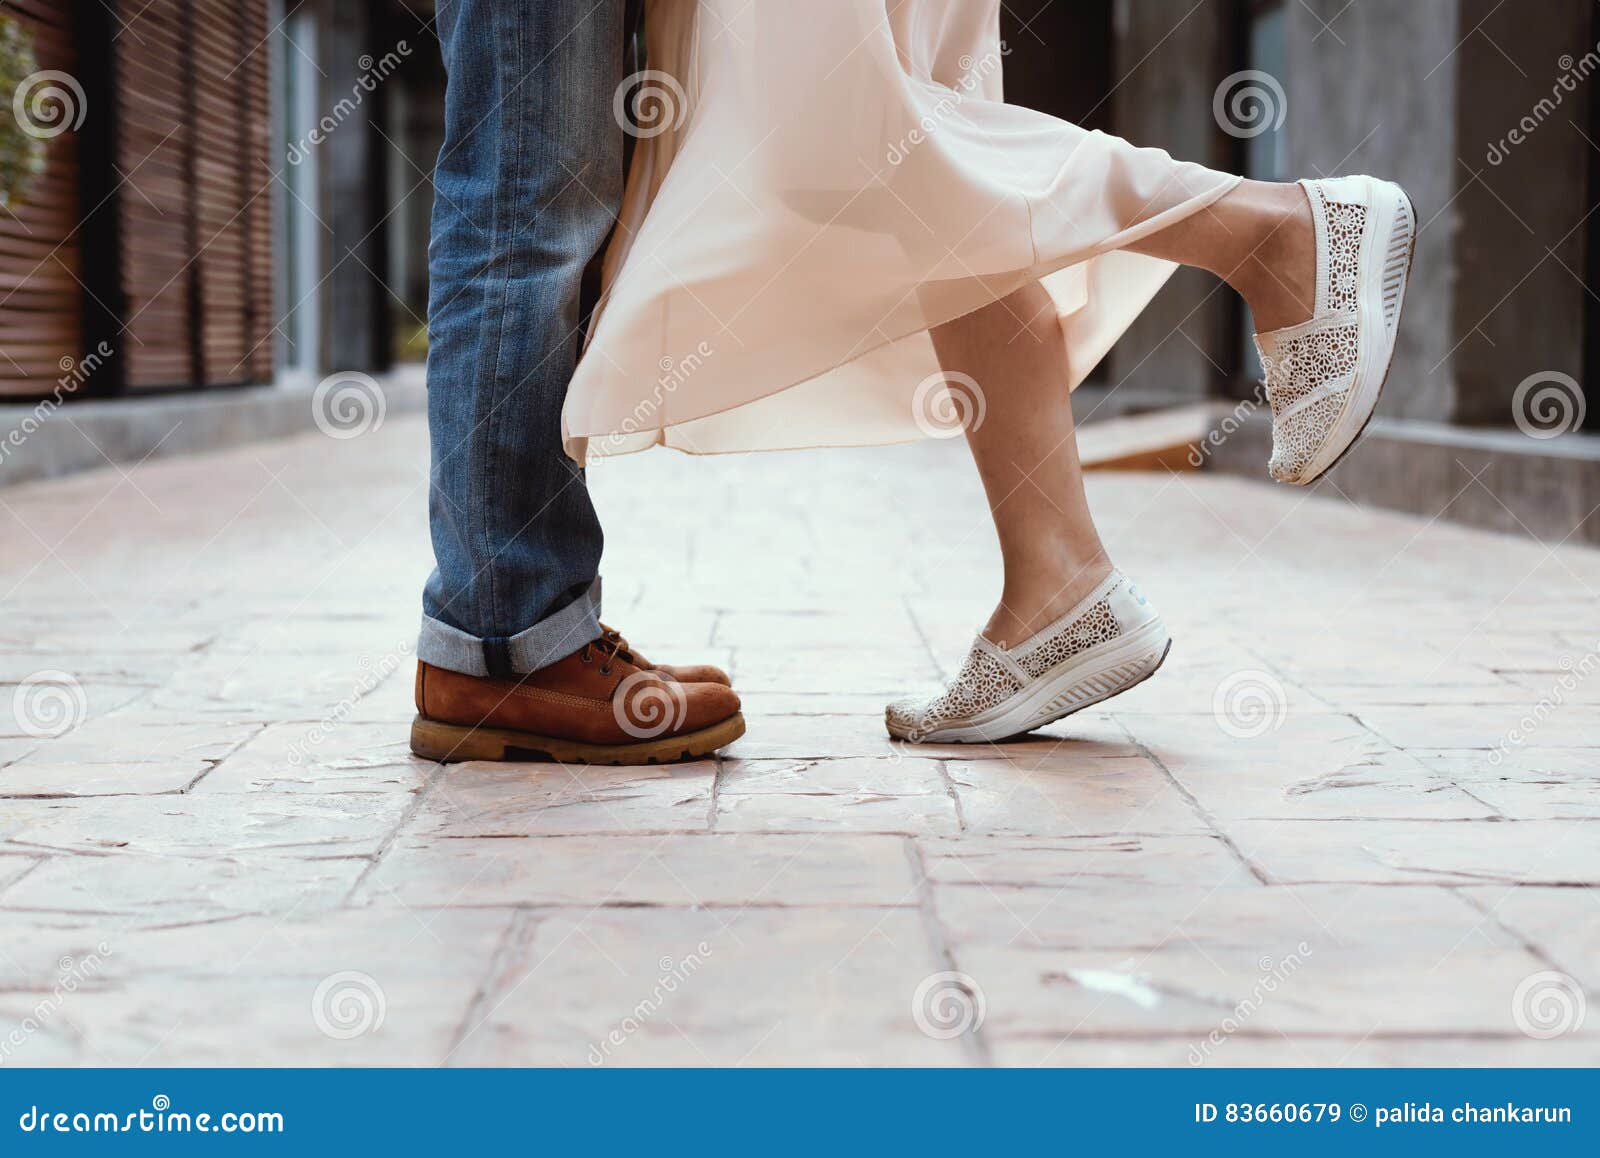 the couple kissing, couples foots stay at the street